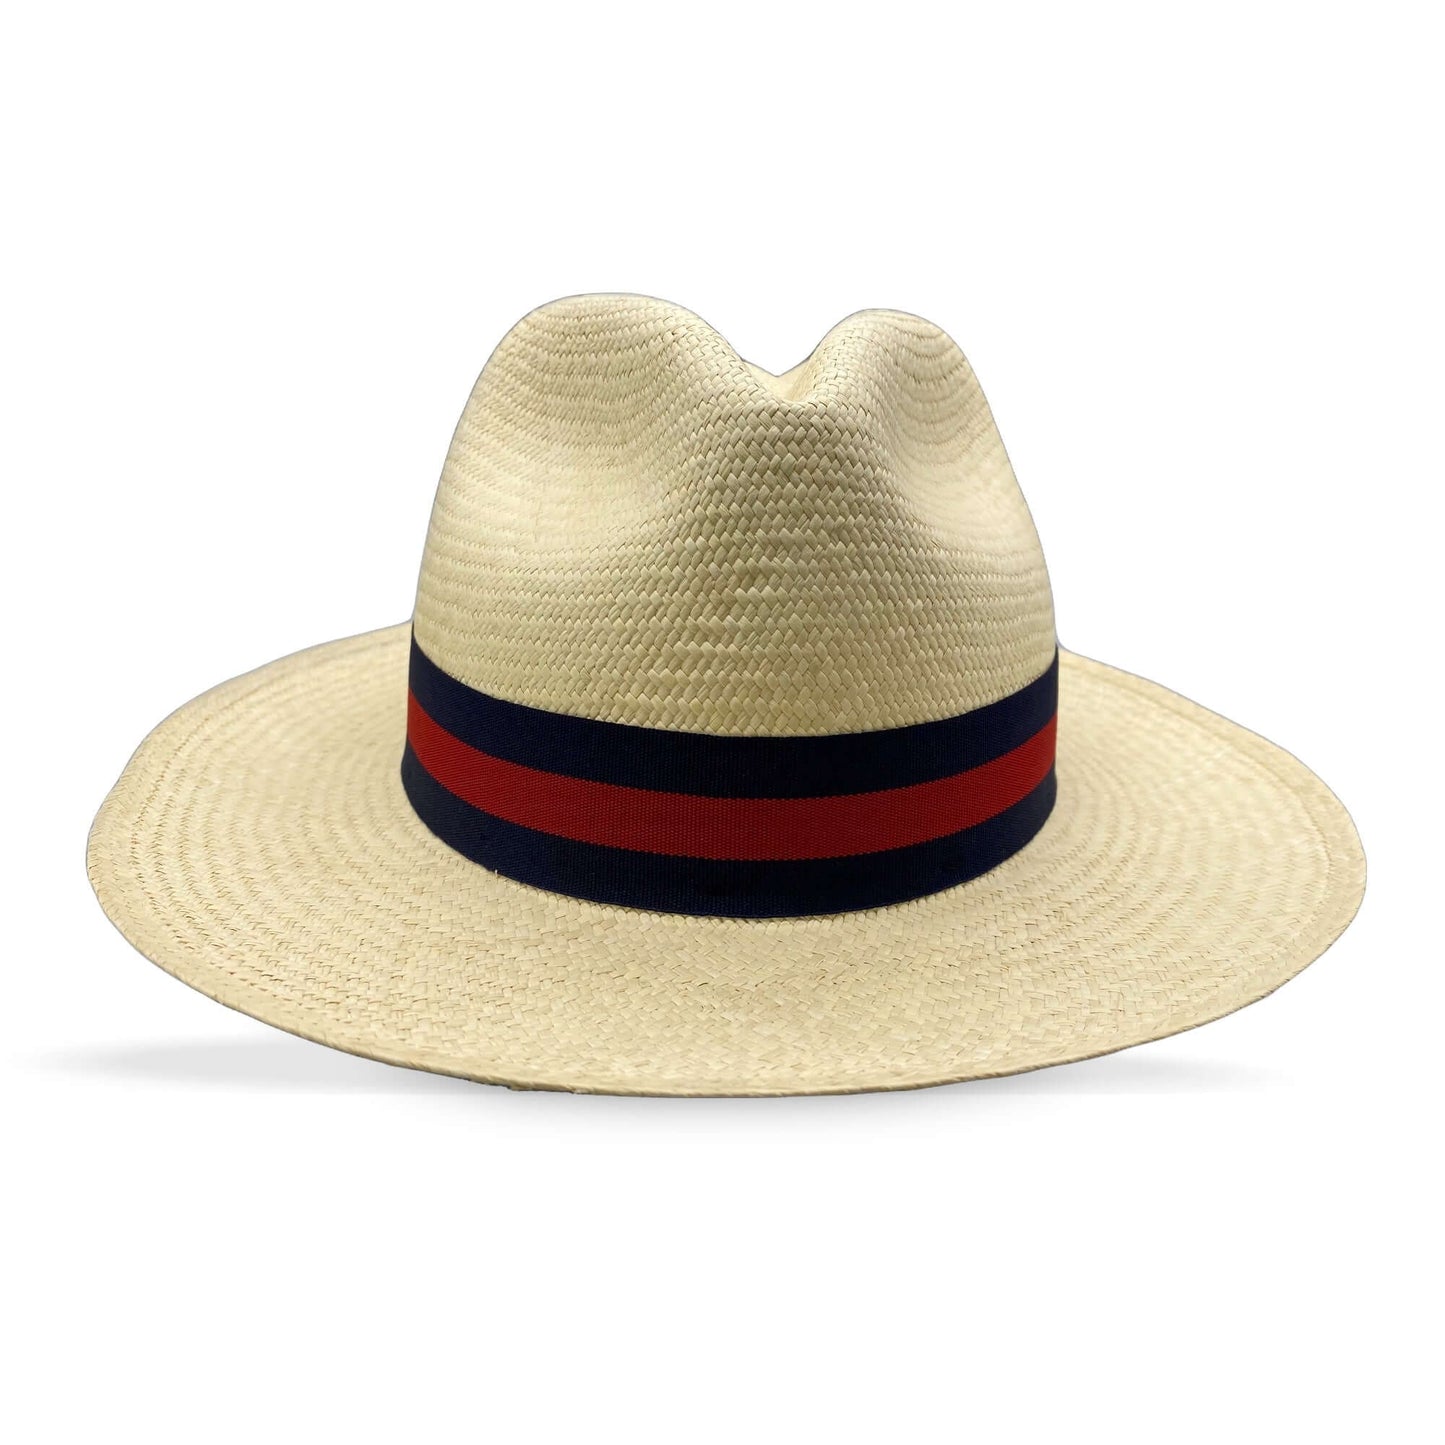 CLASSIC FEDORA STRAW HAT WITH A BLUE AND RED HAT BAND The Hip Hat